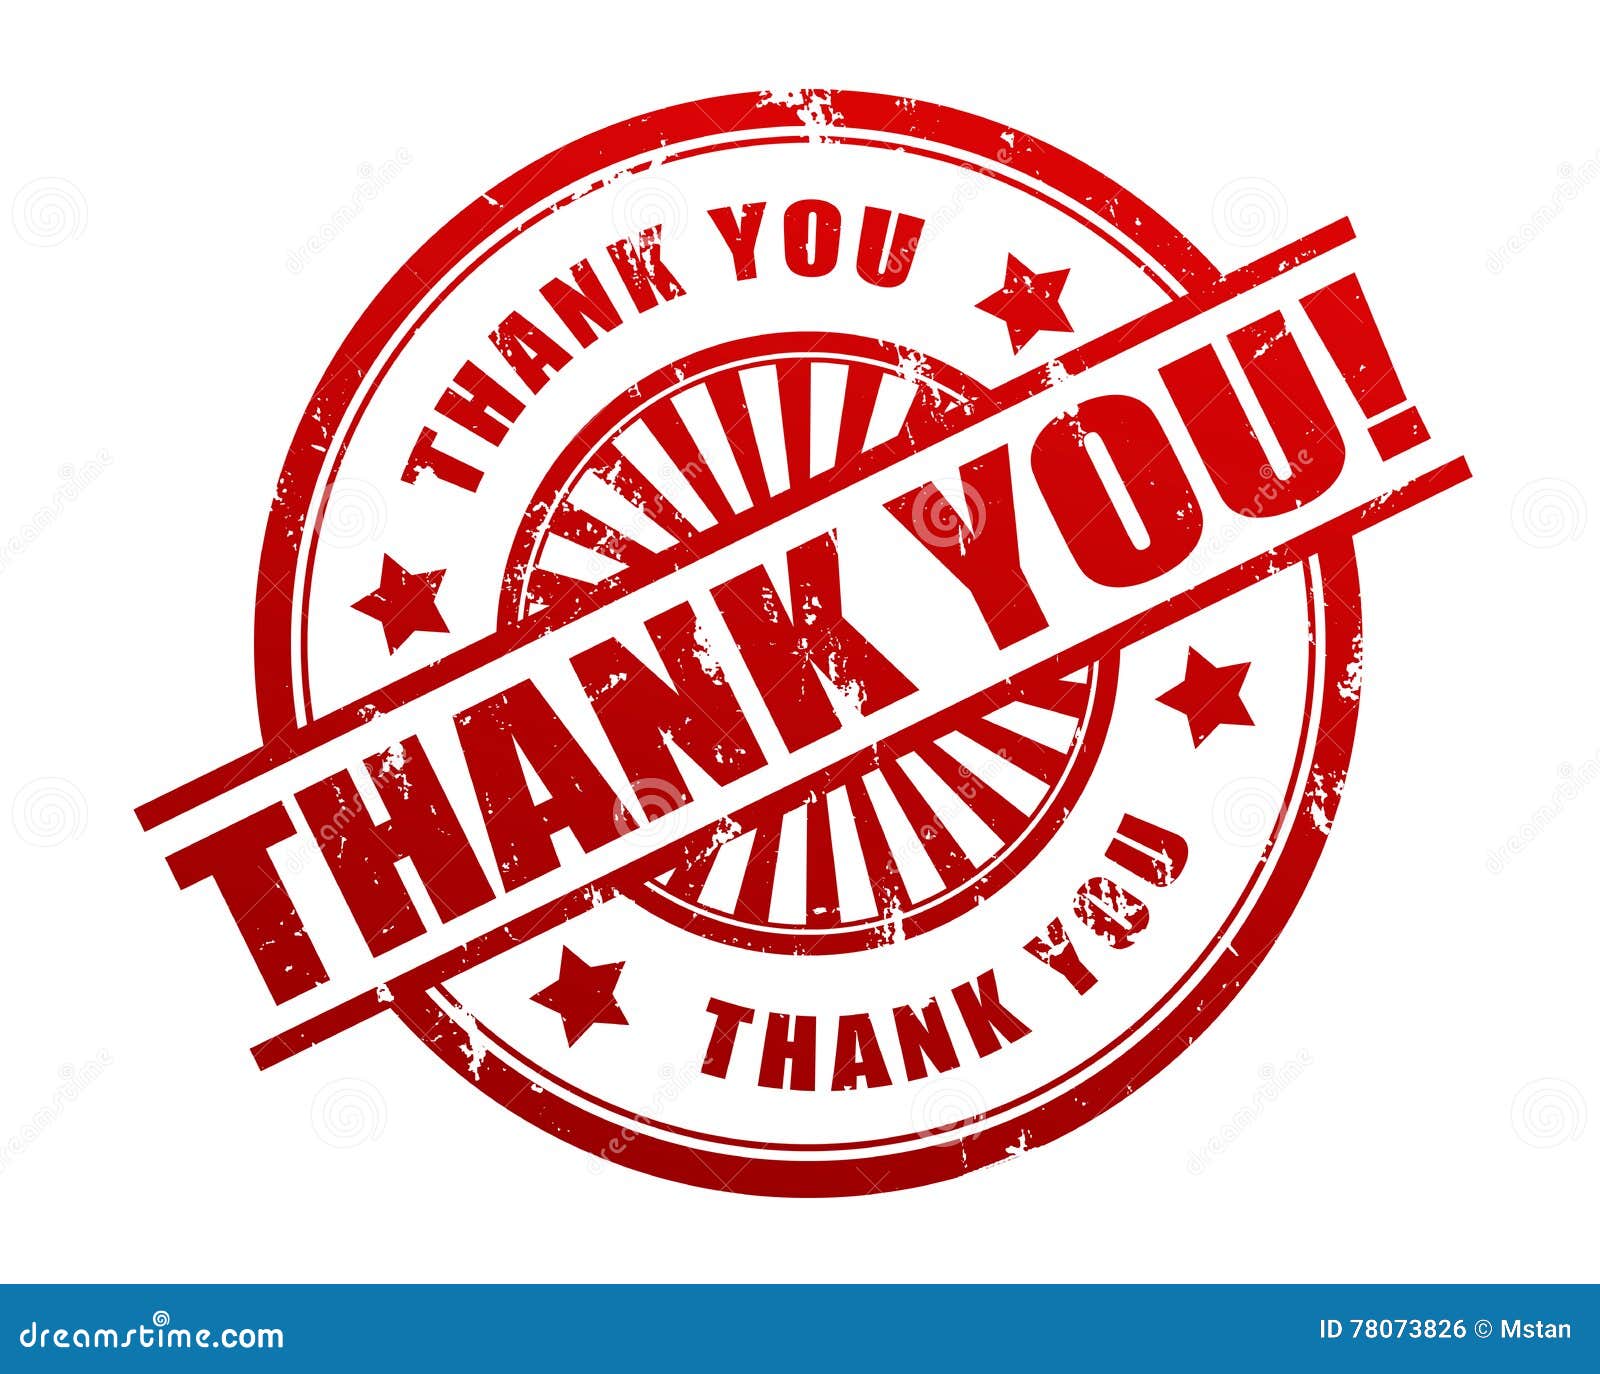 Thank you stamp stock vector. Illustration of round - 153381623